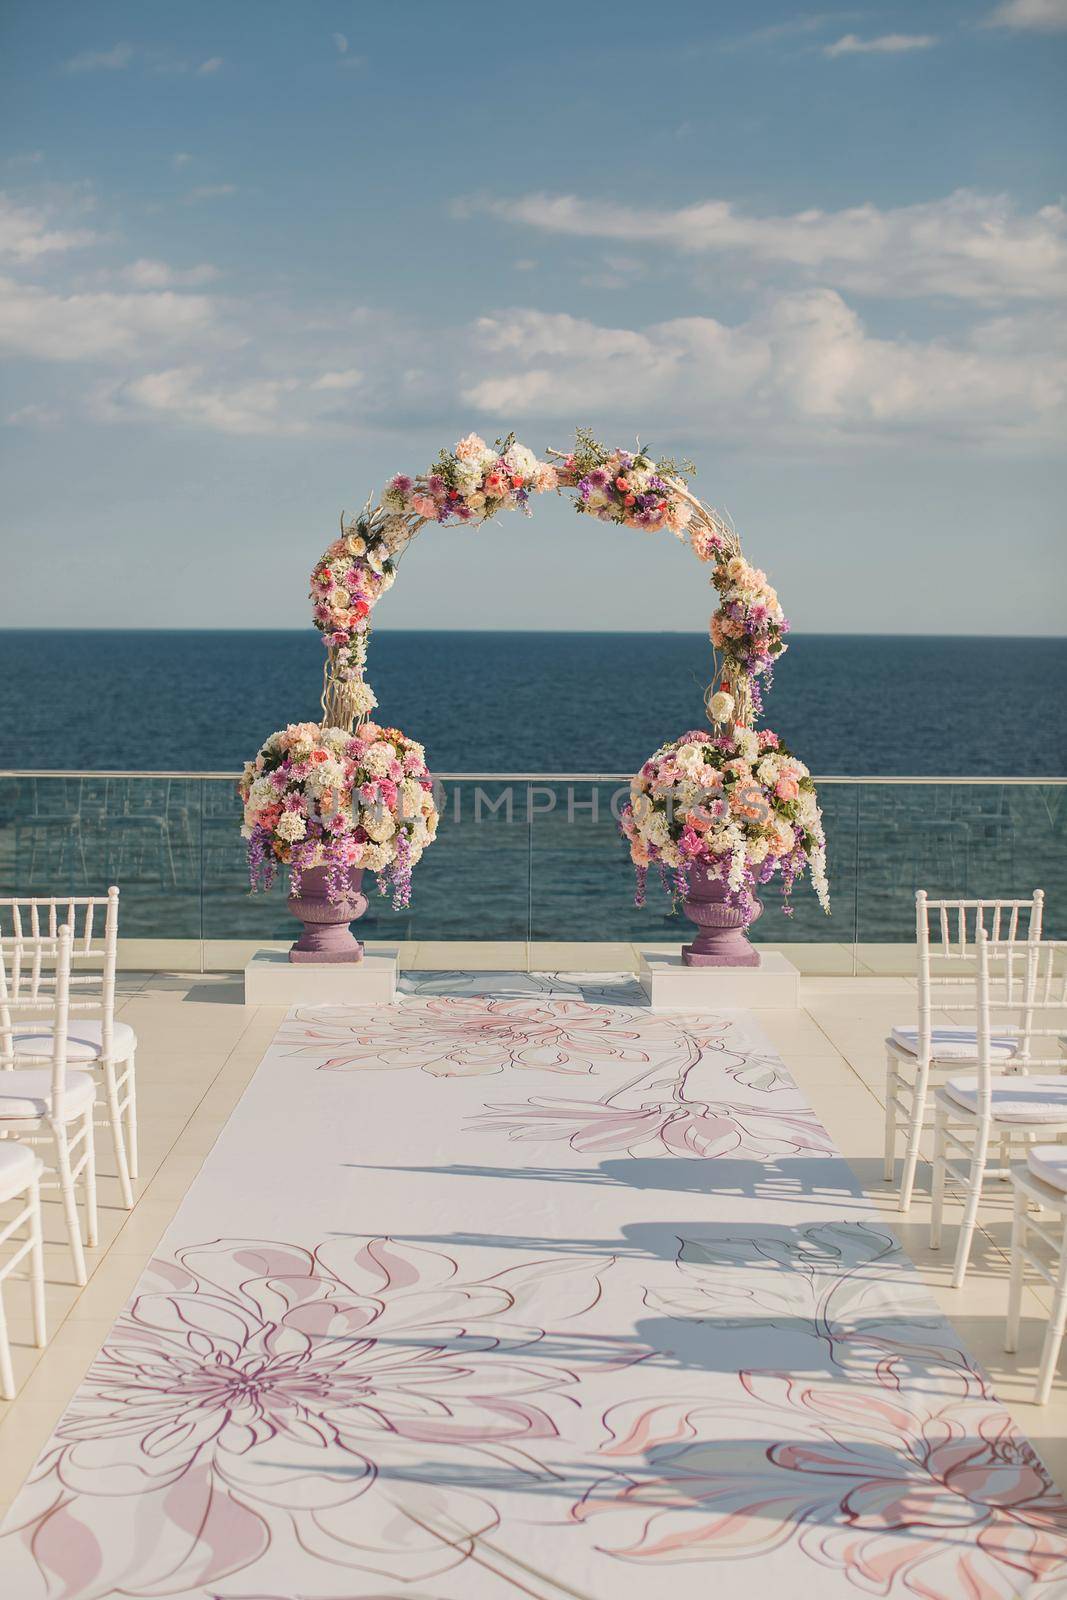 Wedding arch with fresh flowers on a sea background. Vases with fresh flowers.